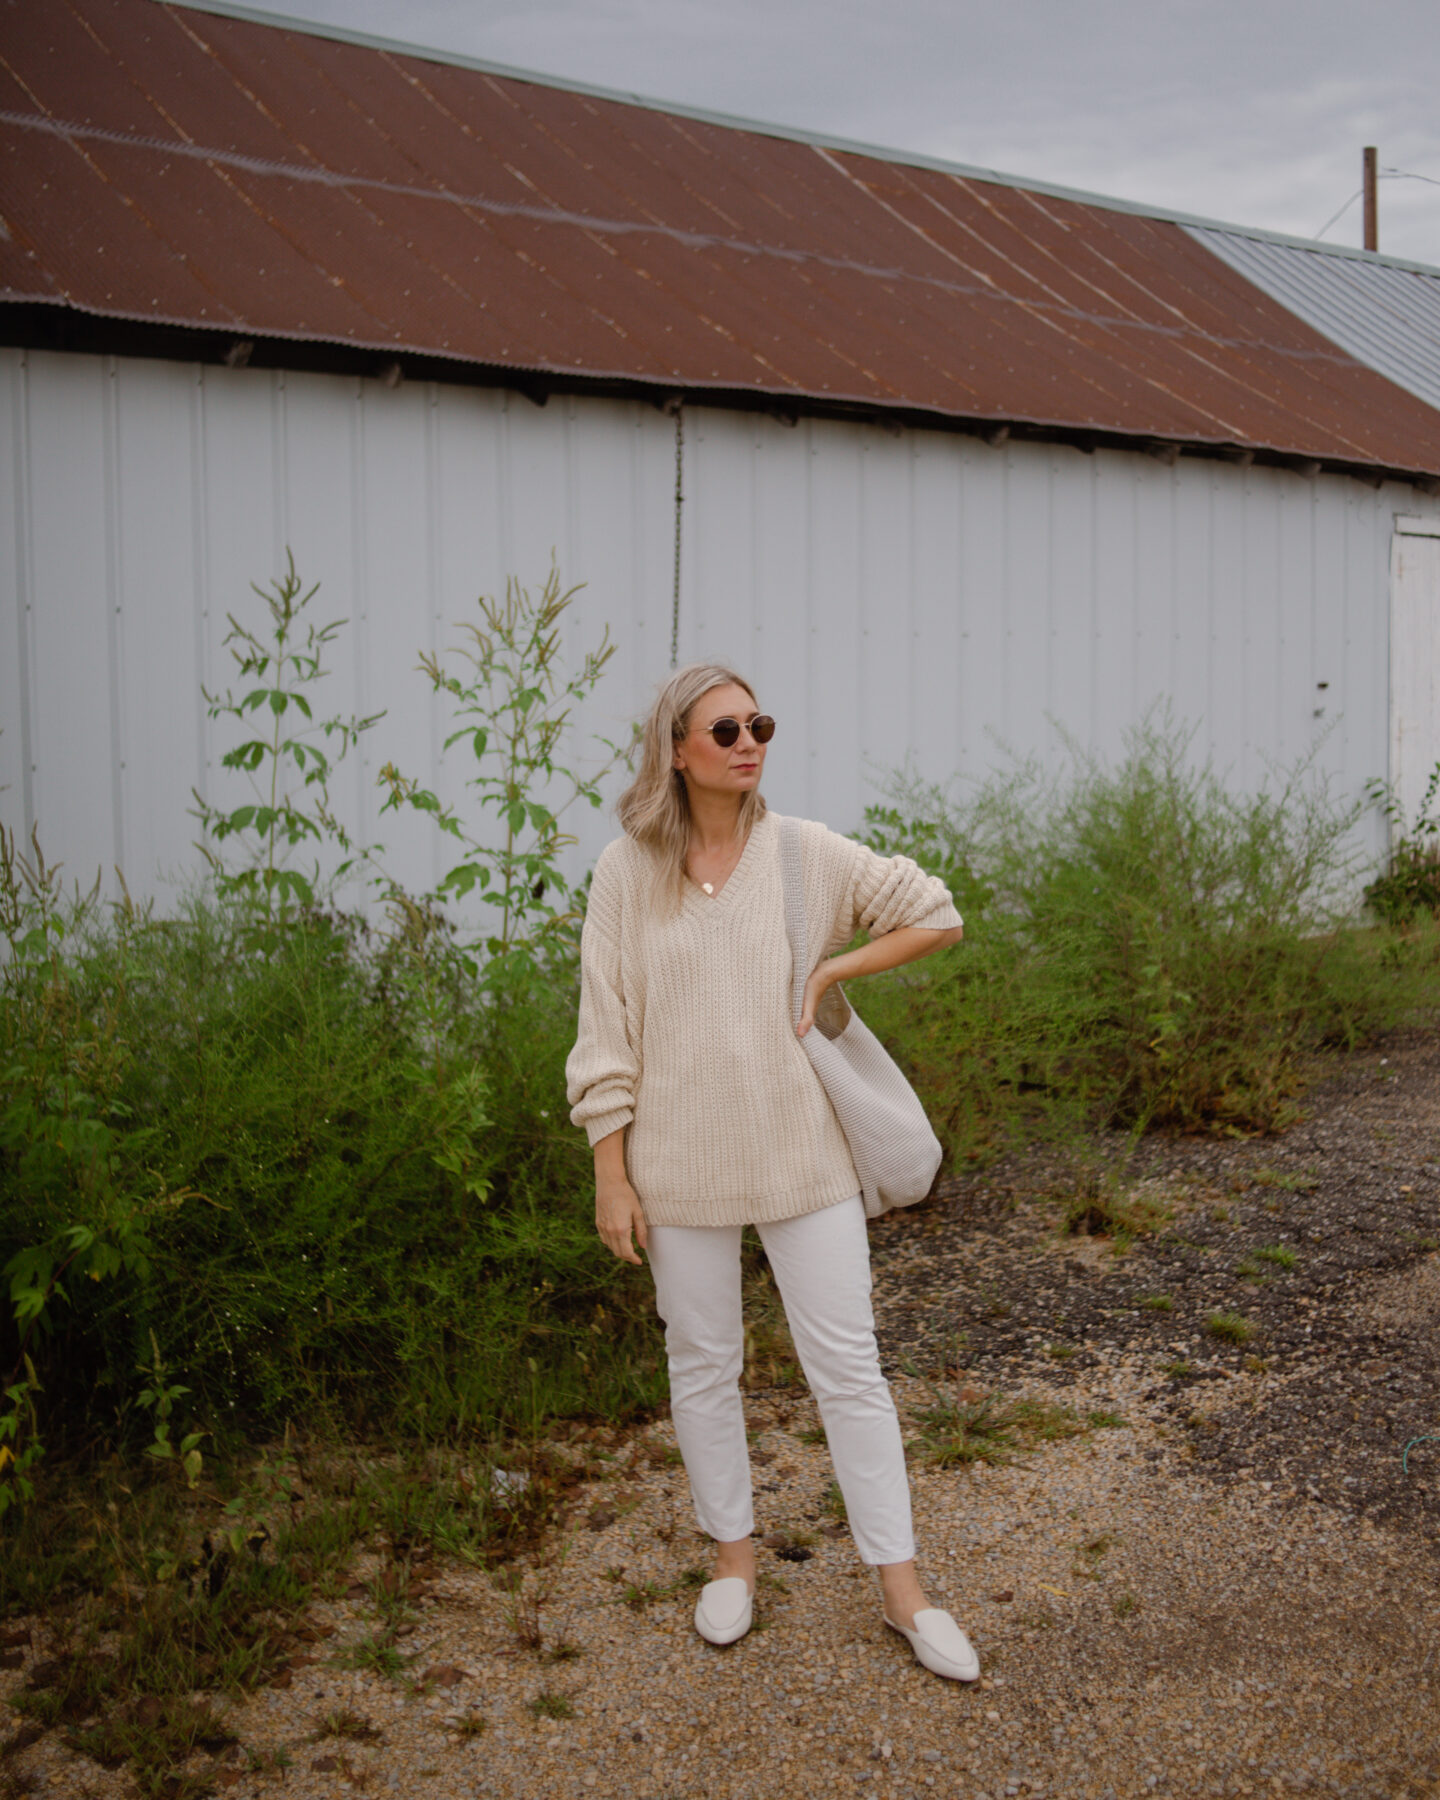 Karin Emily wearing Jenni Kayne Cotton Cabin Sweater and white everlane 90's cheeky jeans and white mules